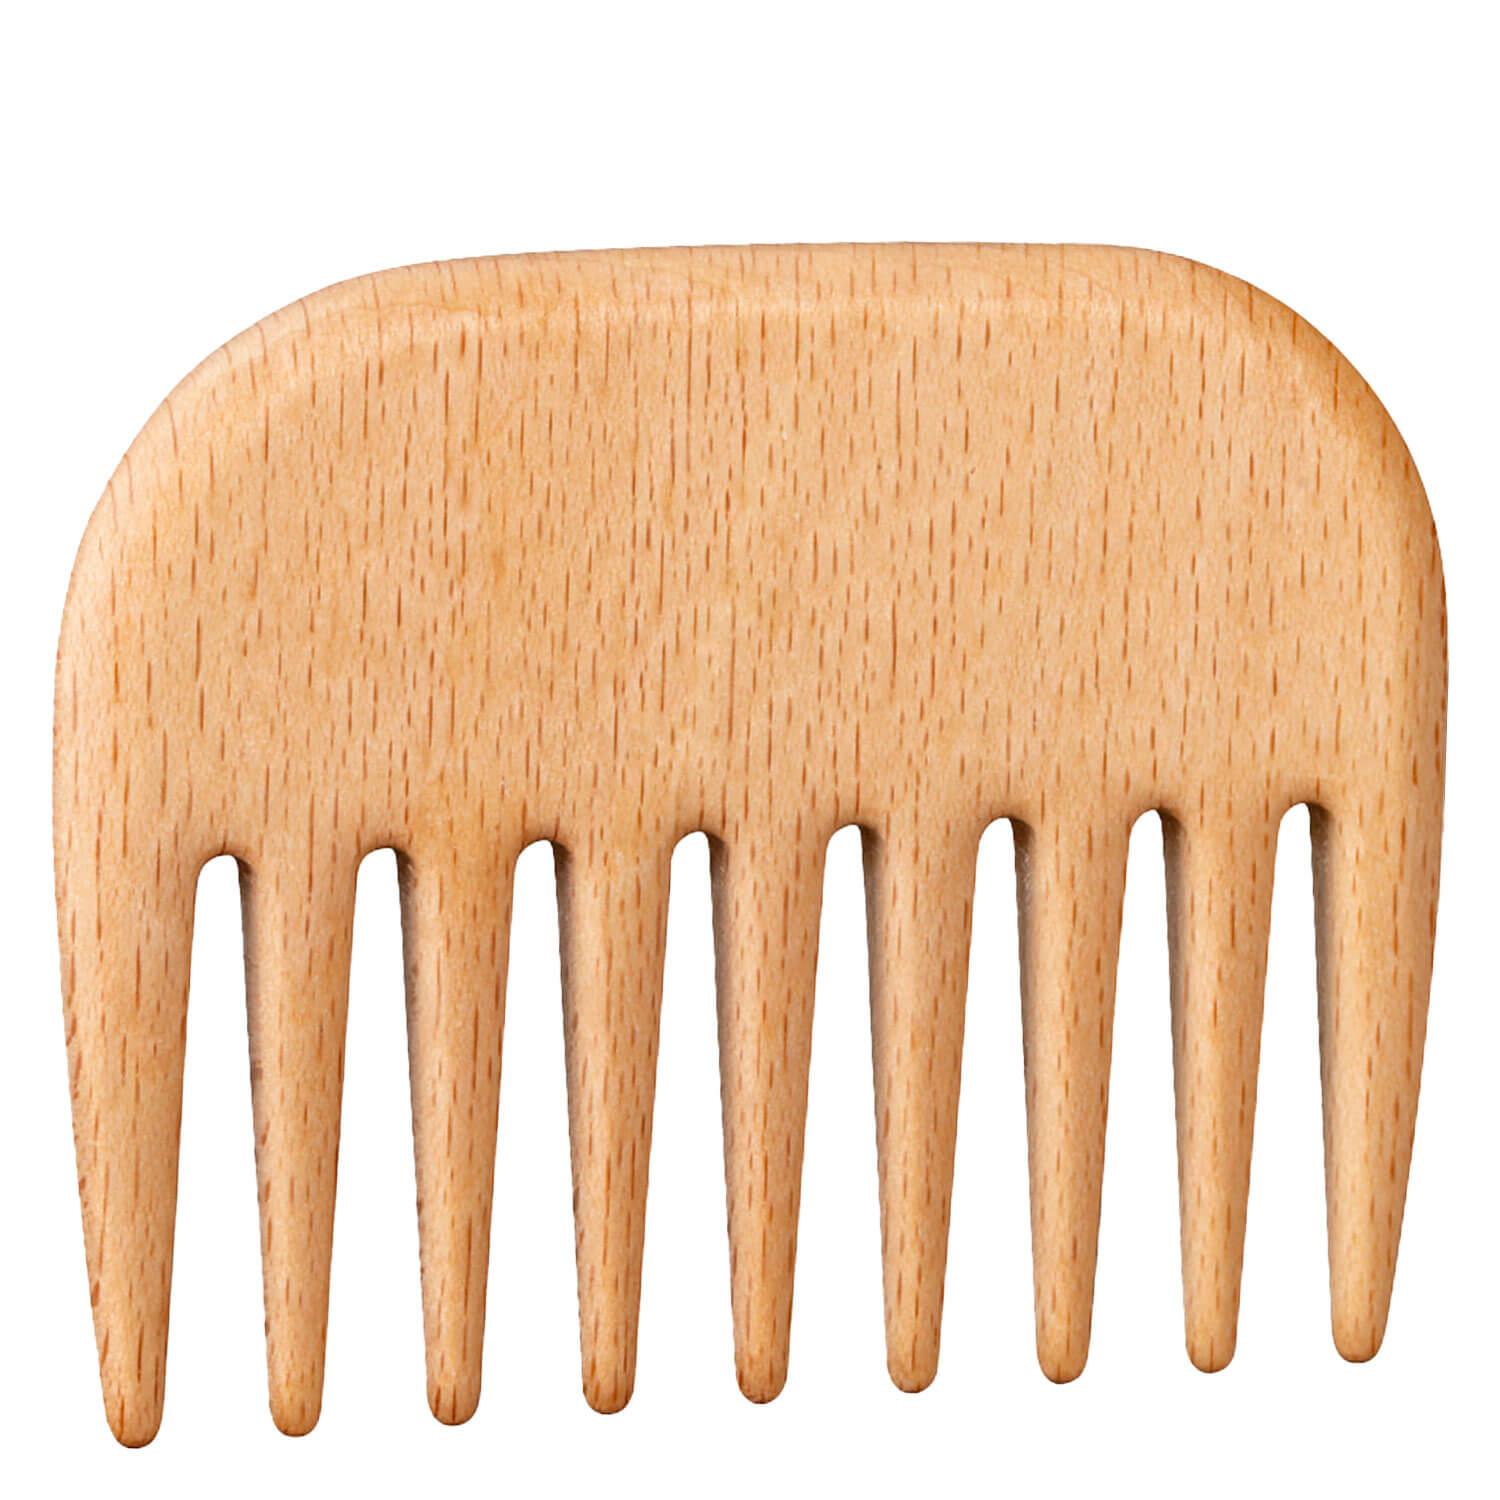 Trisa Hair Care - Natural Brilliance Antistatic & Styling Afro Comb